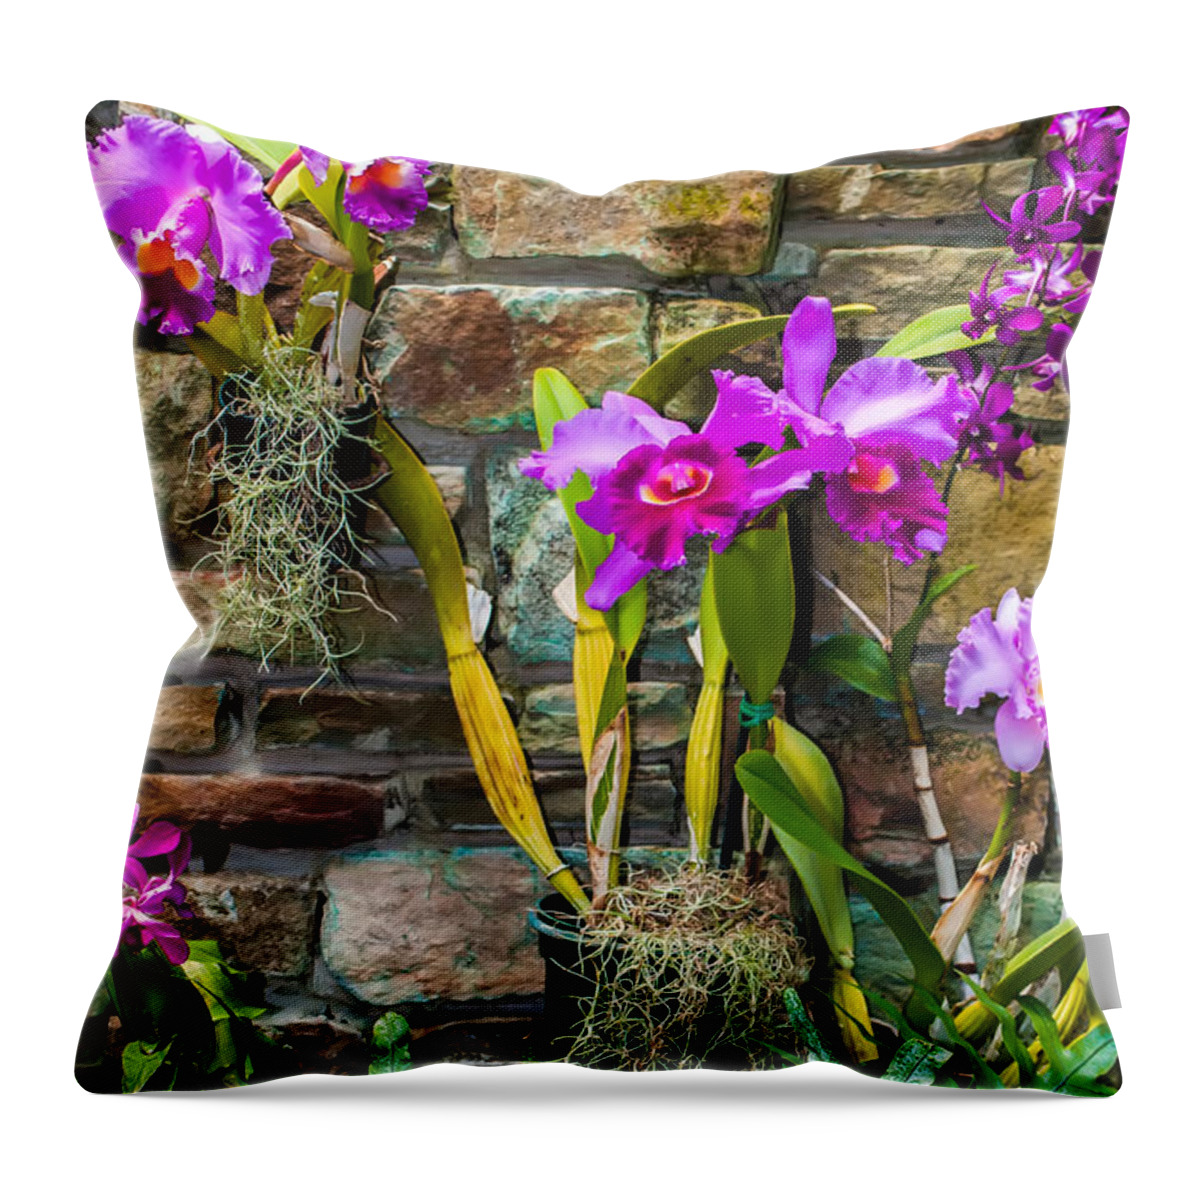 Spa Throw Pillow featuring the photograph Purple Orchids With Cultured Stone Background by Alex Grichenko